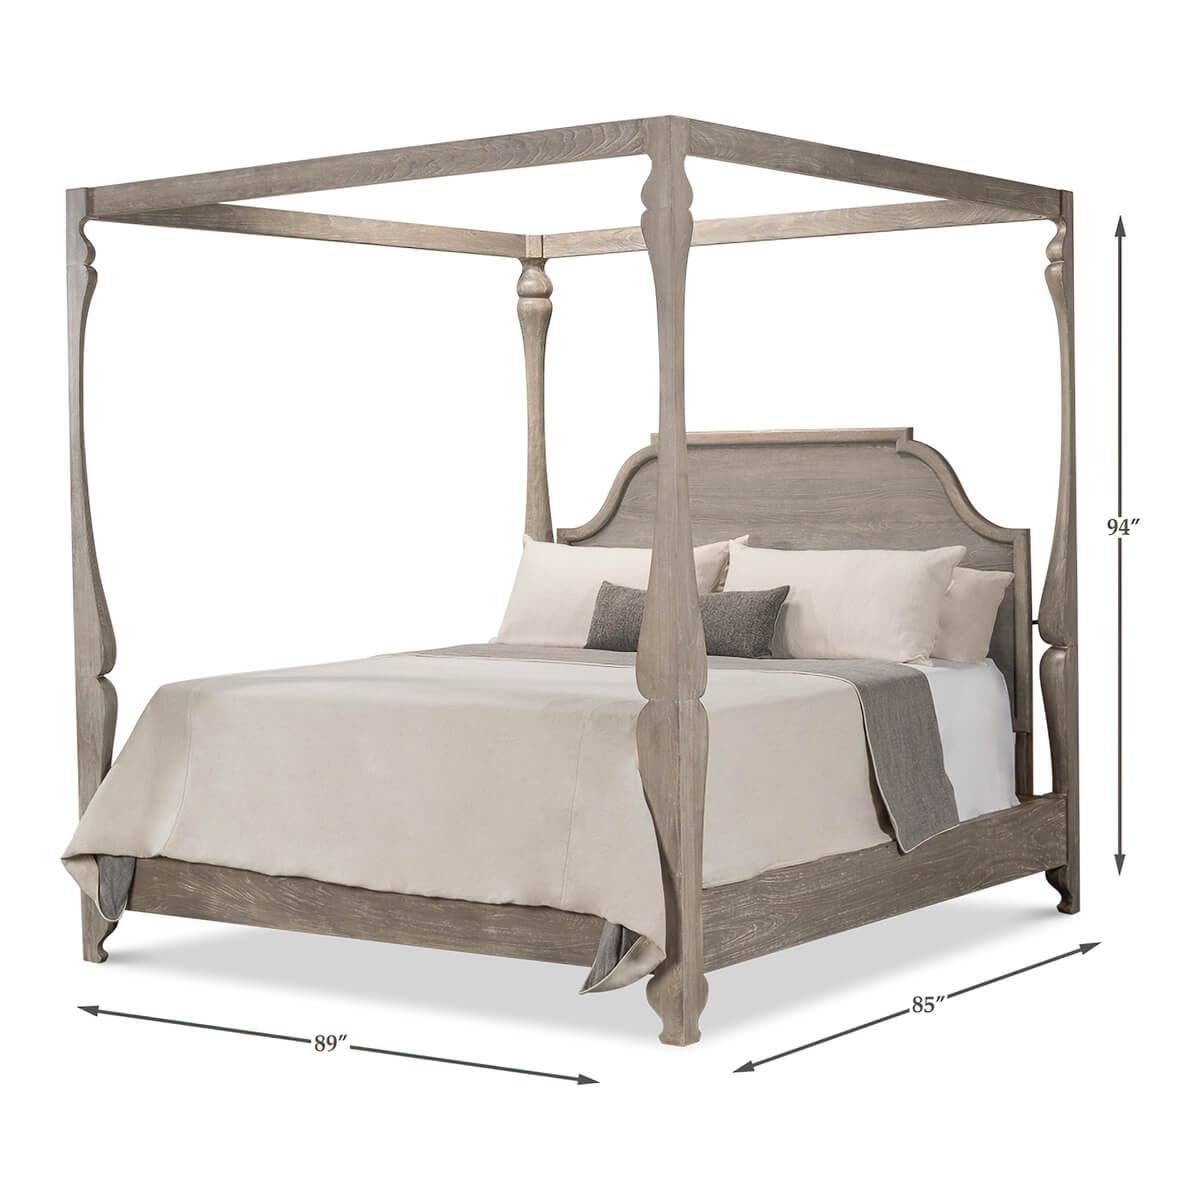 A European-style canopy bed with a grey moonstone finish. This bed features beautifully carved posts crafted from beechwood and accented with iron and brass. 

Dimensions: 89